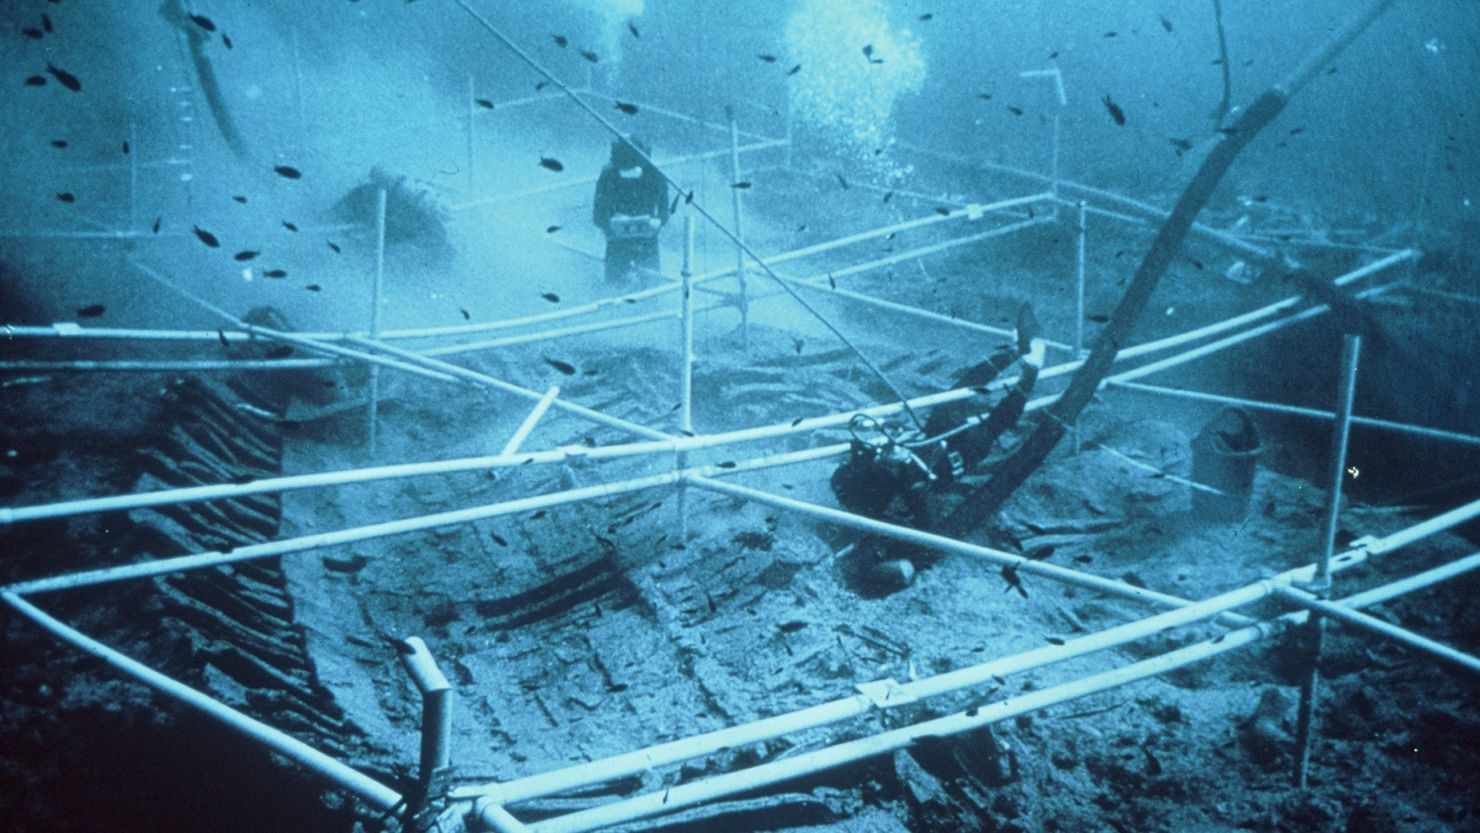 After the Kyrenia ship's discovery off the north coast of Cyprus in 1965, a team led by the late marine archaeologist Michael Katzev excavated the wreck in the late ’60s.